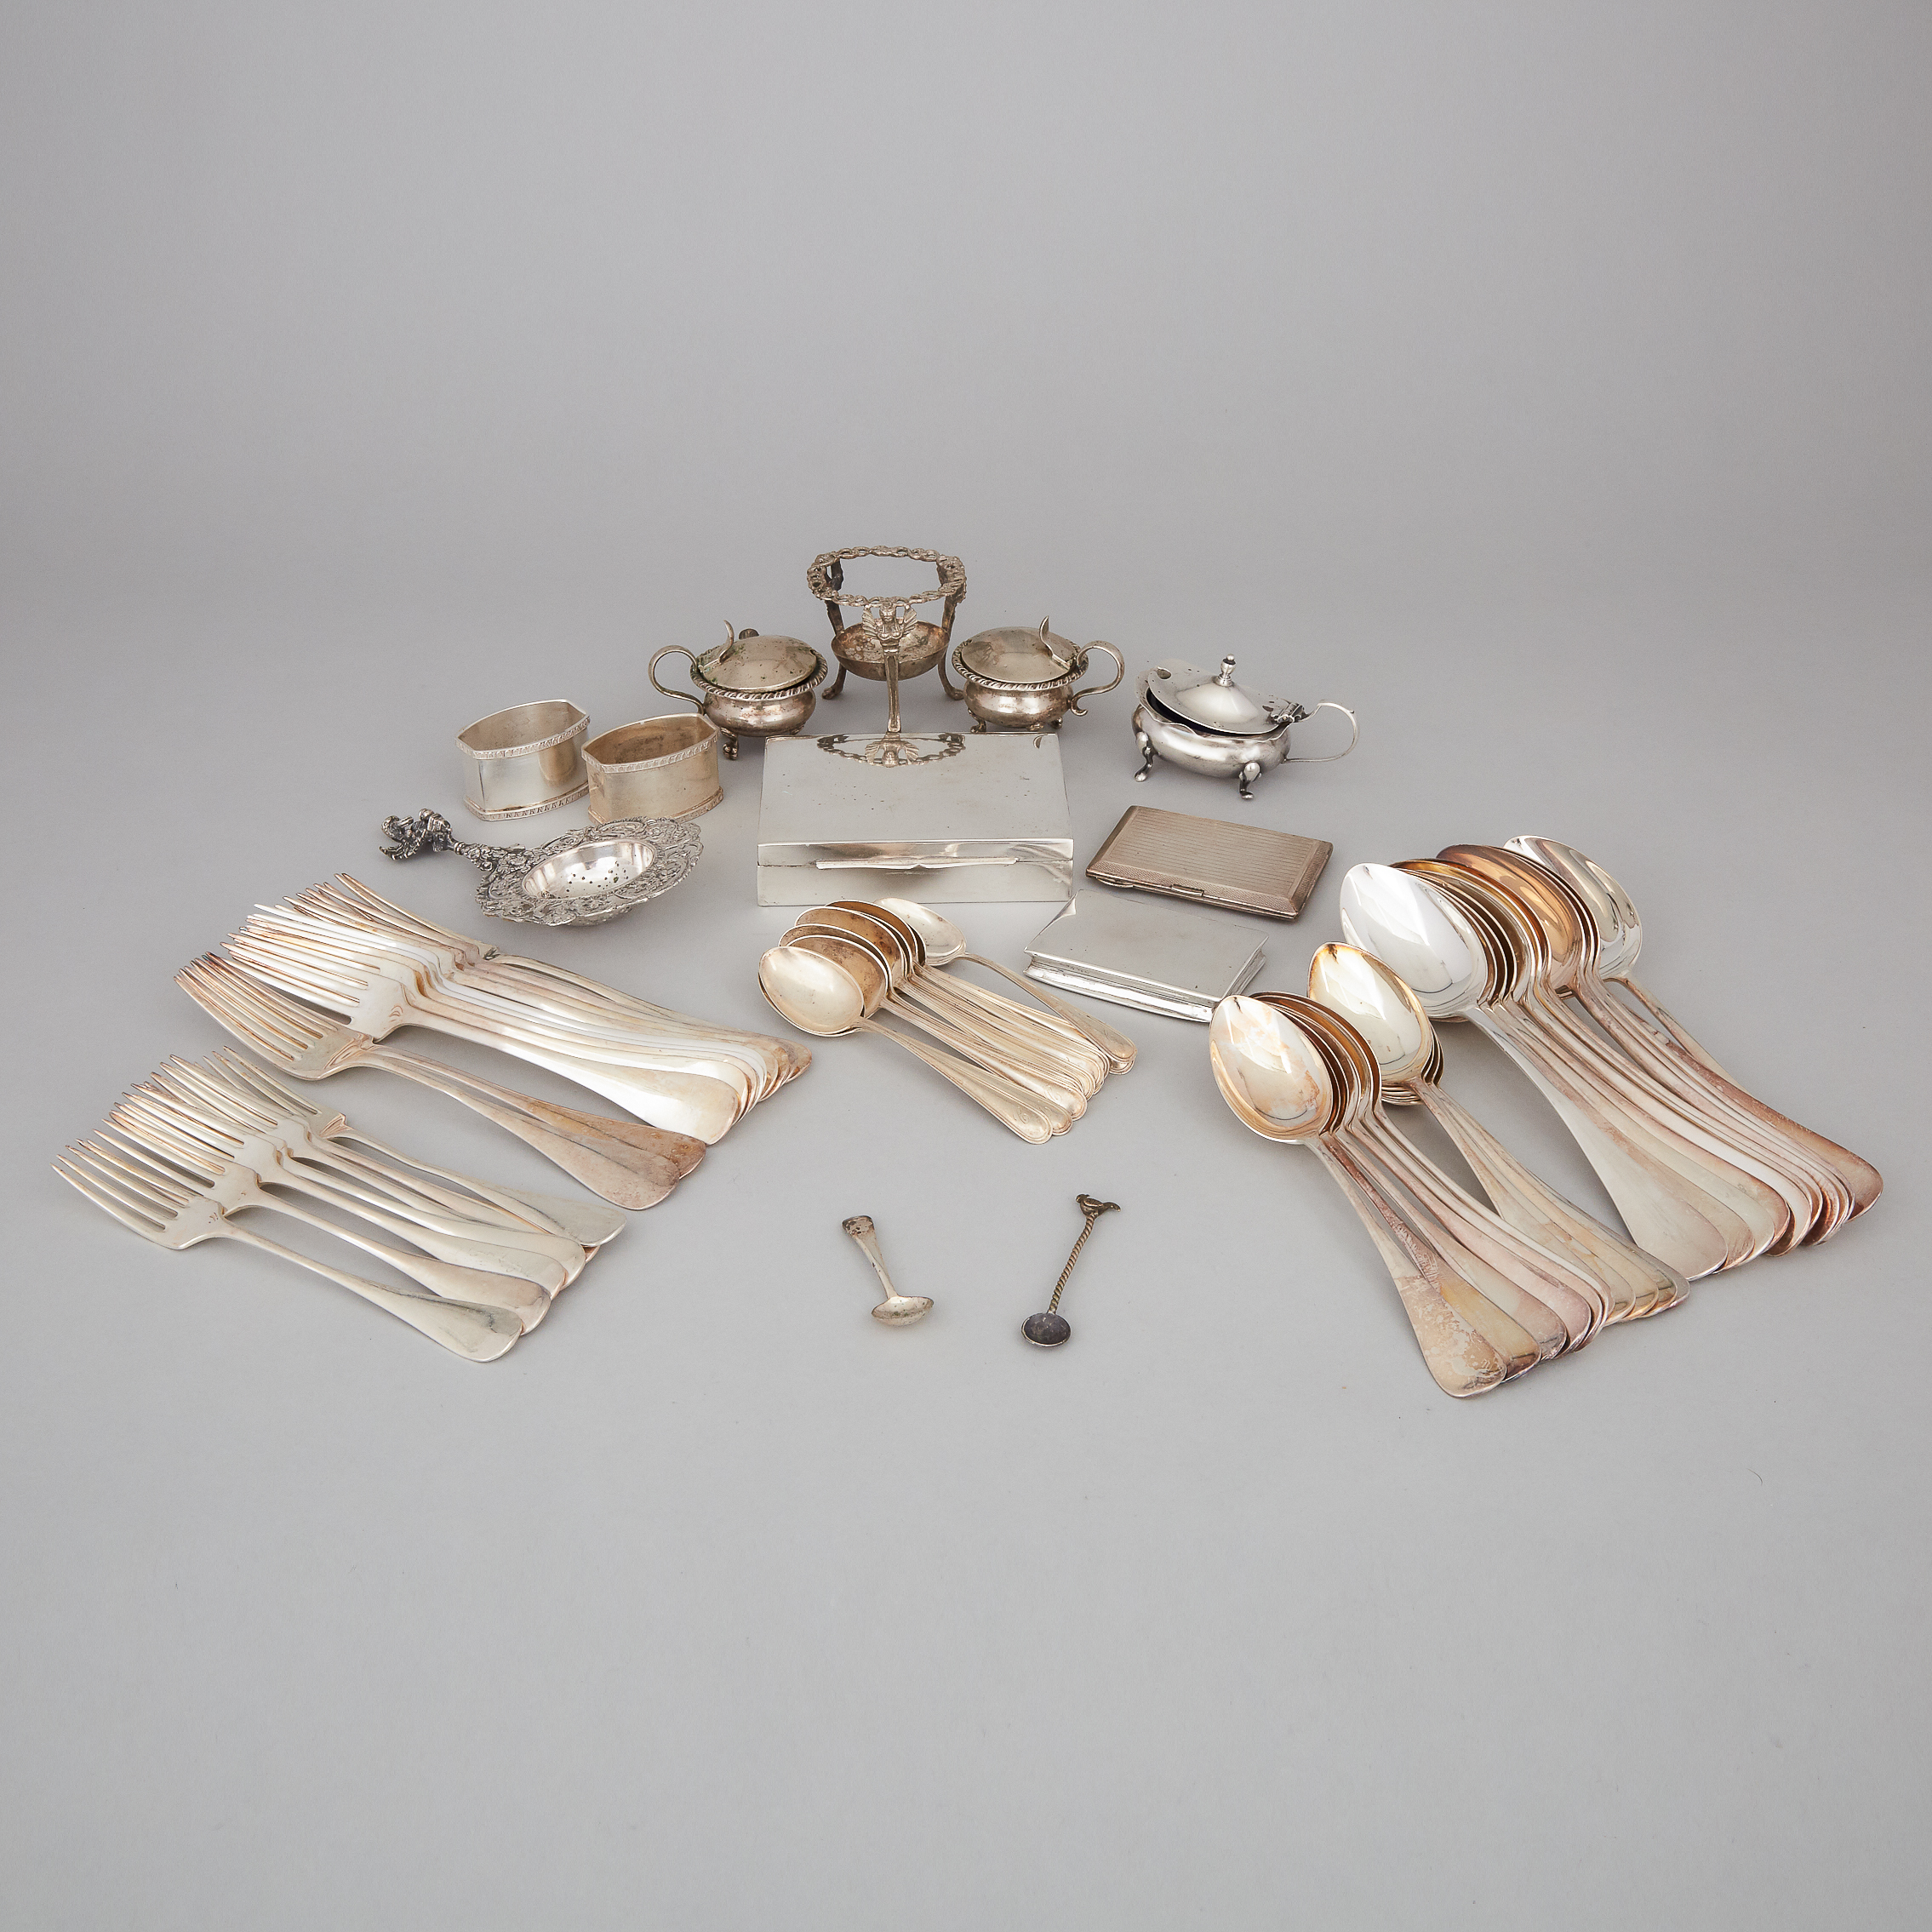 Group of Mainly Italian Silver, 20th century